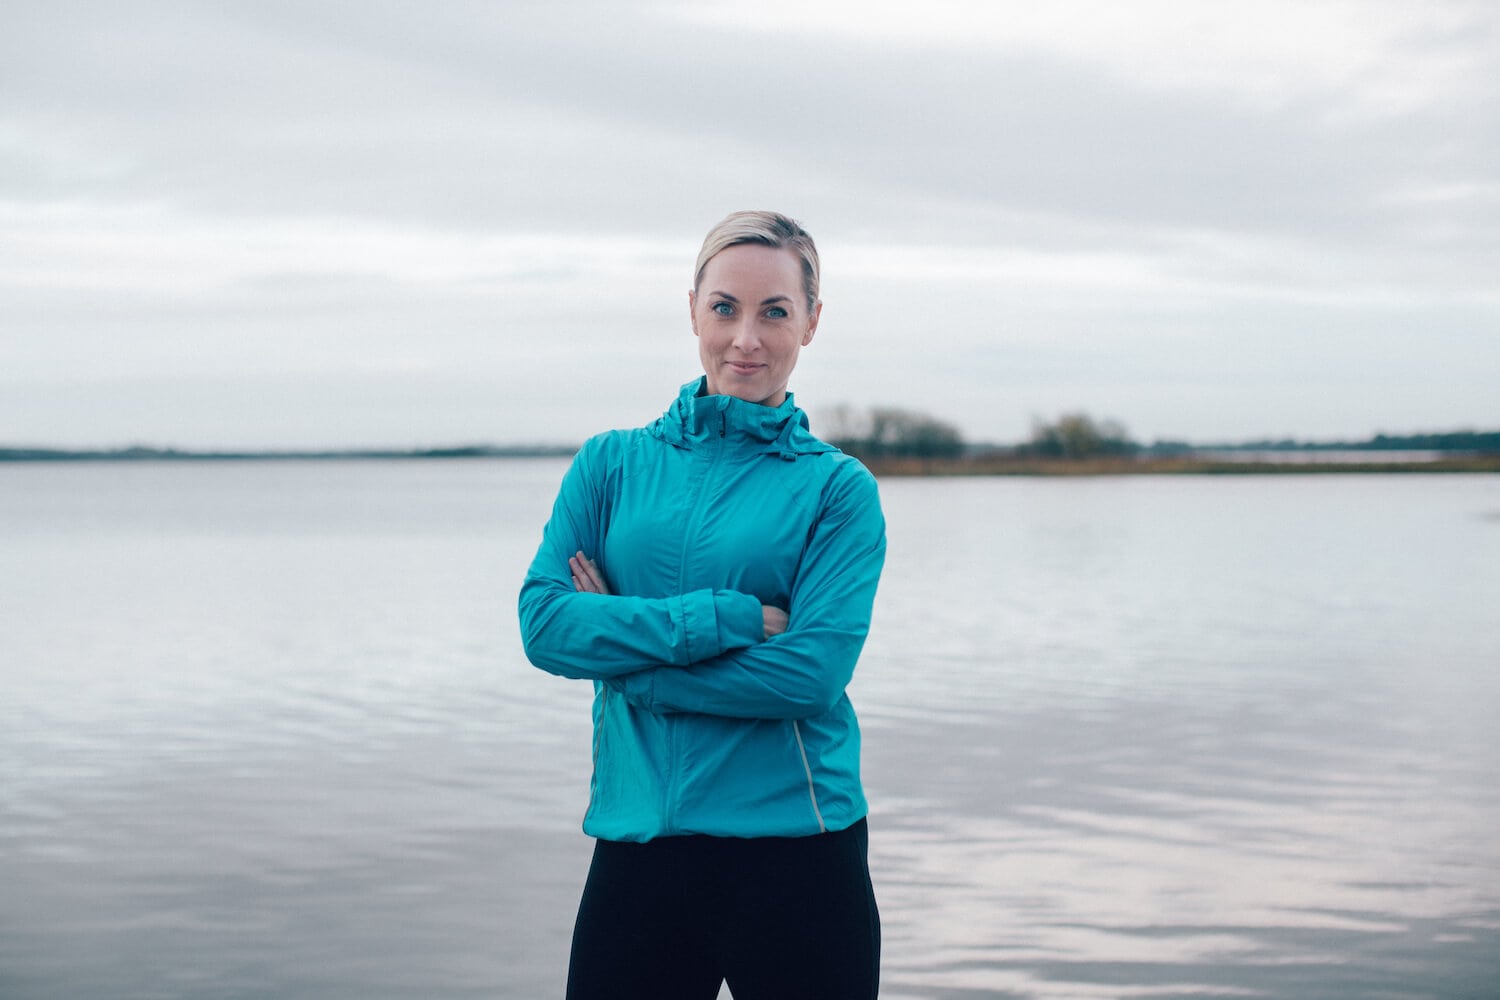 Kathryn Thomas Pure Results ireland no frontiers travel influencer wellness